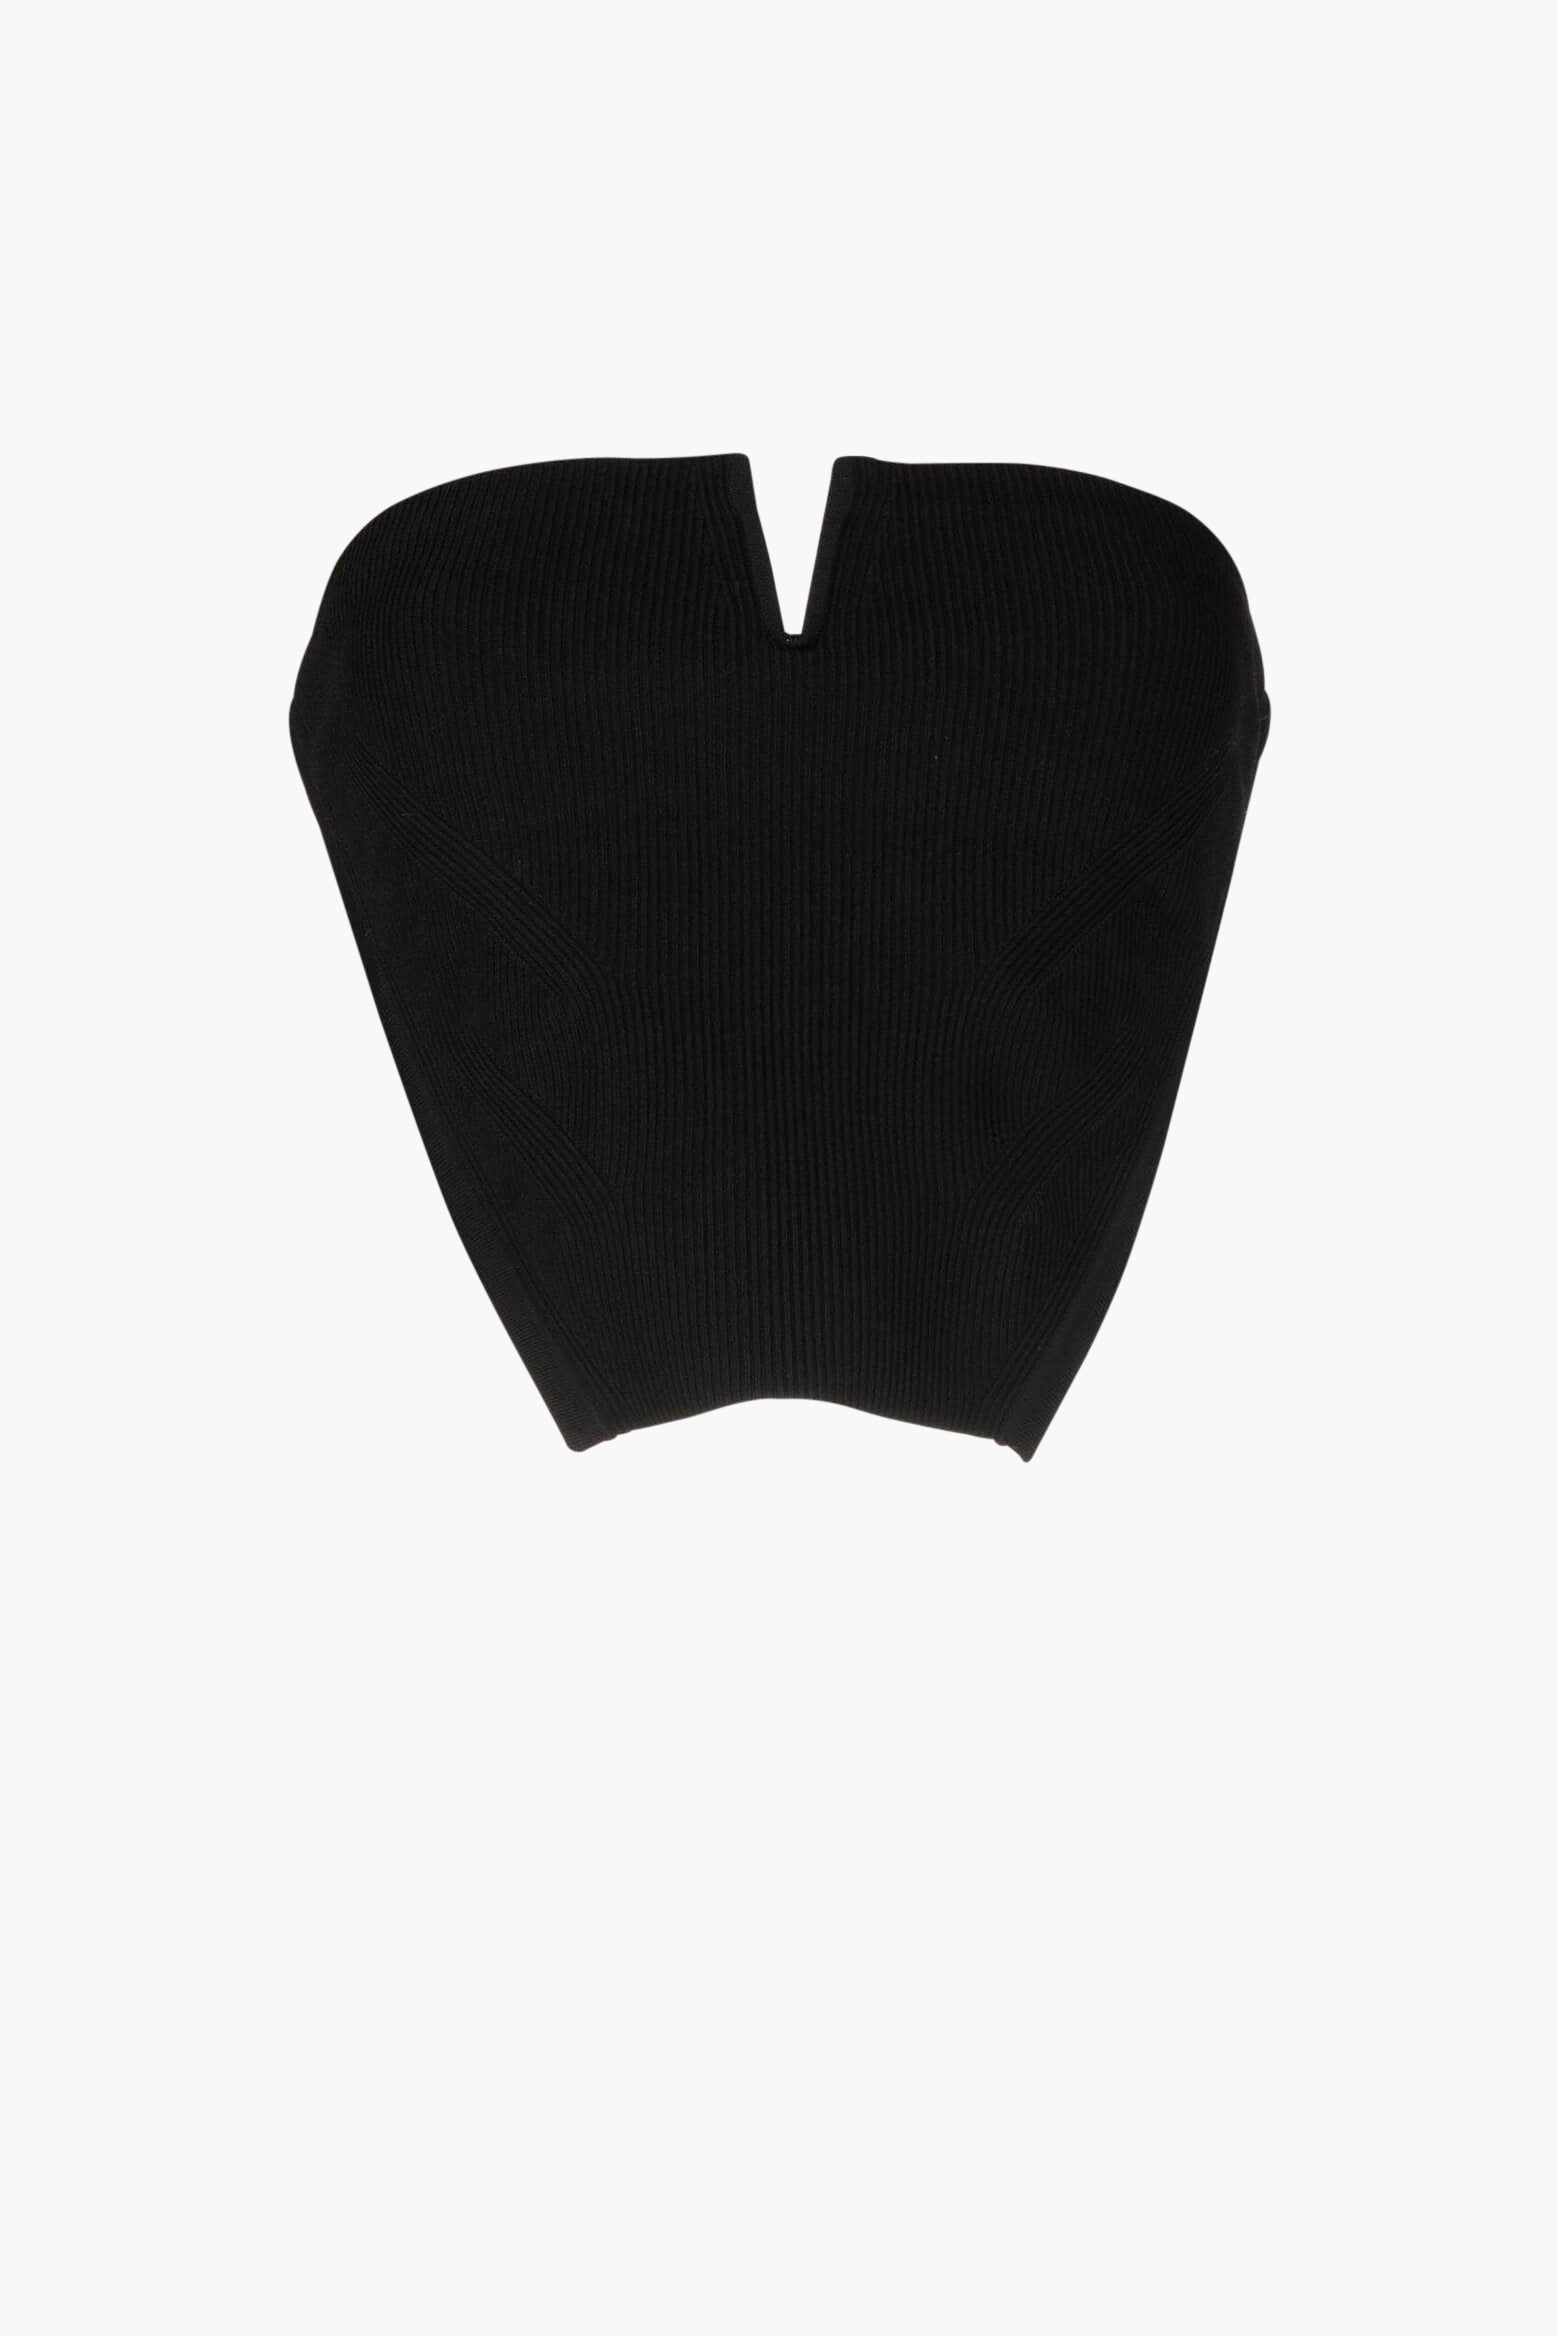 DION LEE Angled Rib Bustier in Black | TNT The New Trend